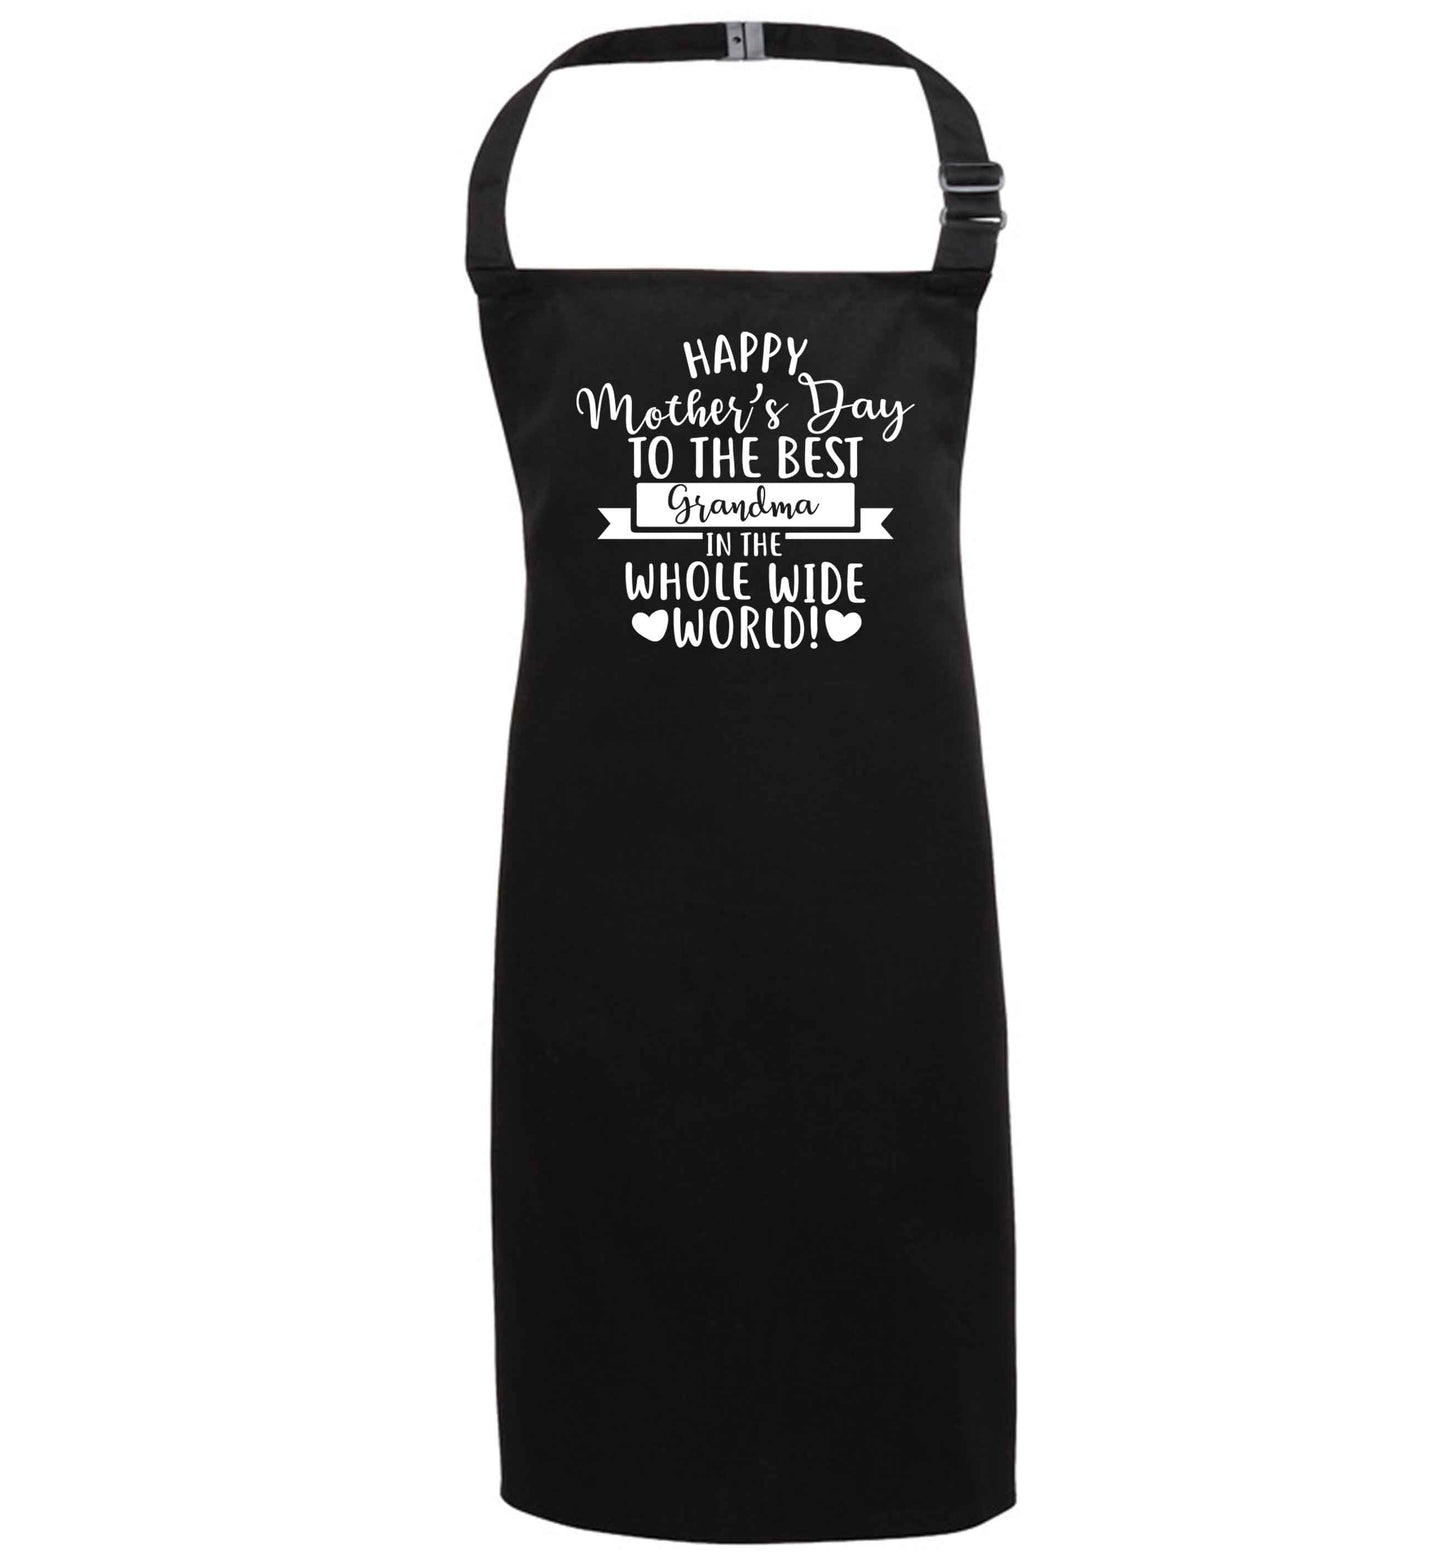 Happy mother's day to the best grandma in the world black apron 7-10 years